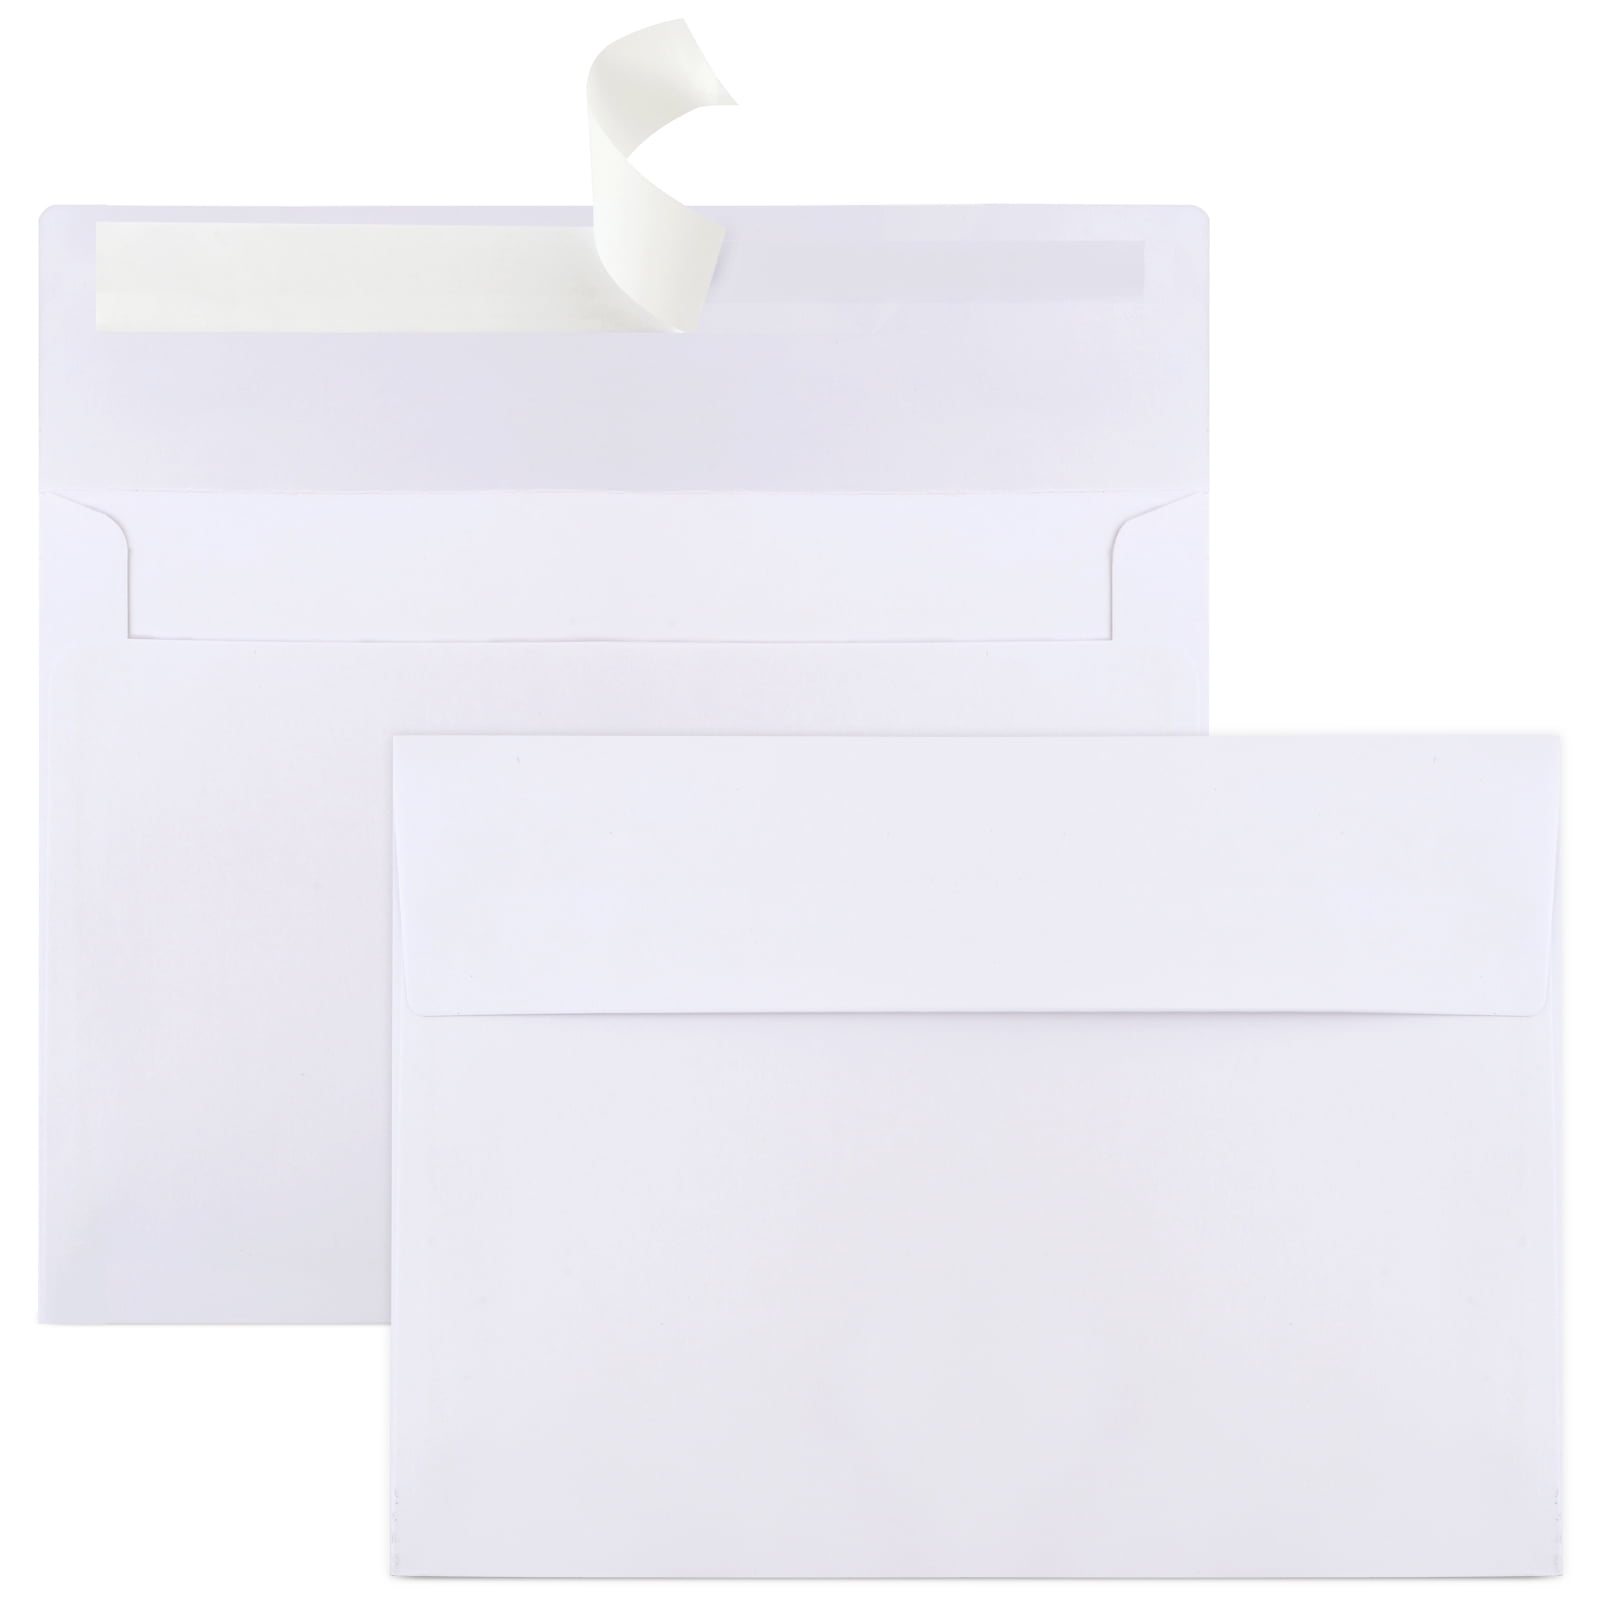 50 Packs 5x7 Envelopes,White A7 Envelopes,5x7 Envelopes for Invitations,Envelopes Self Seal for Weddings,Greeting Cards, Mailing, Invitations